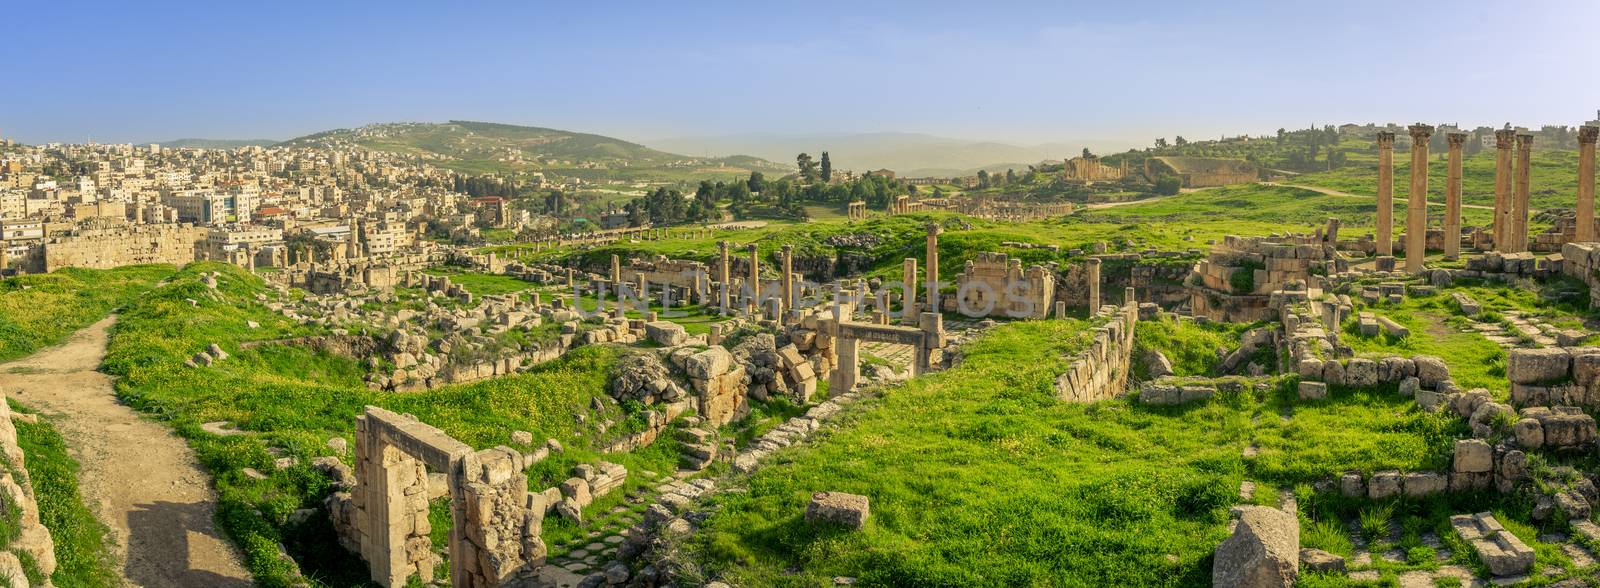 Panorama overview of the Roman site of Gerasa, Jerash, Jordan, with ruins, pillars and remains of the old city clearly visible. Green grass and blue sky on a sunny day in spring.